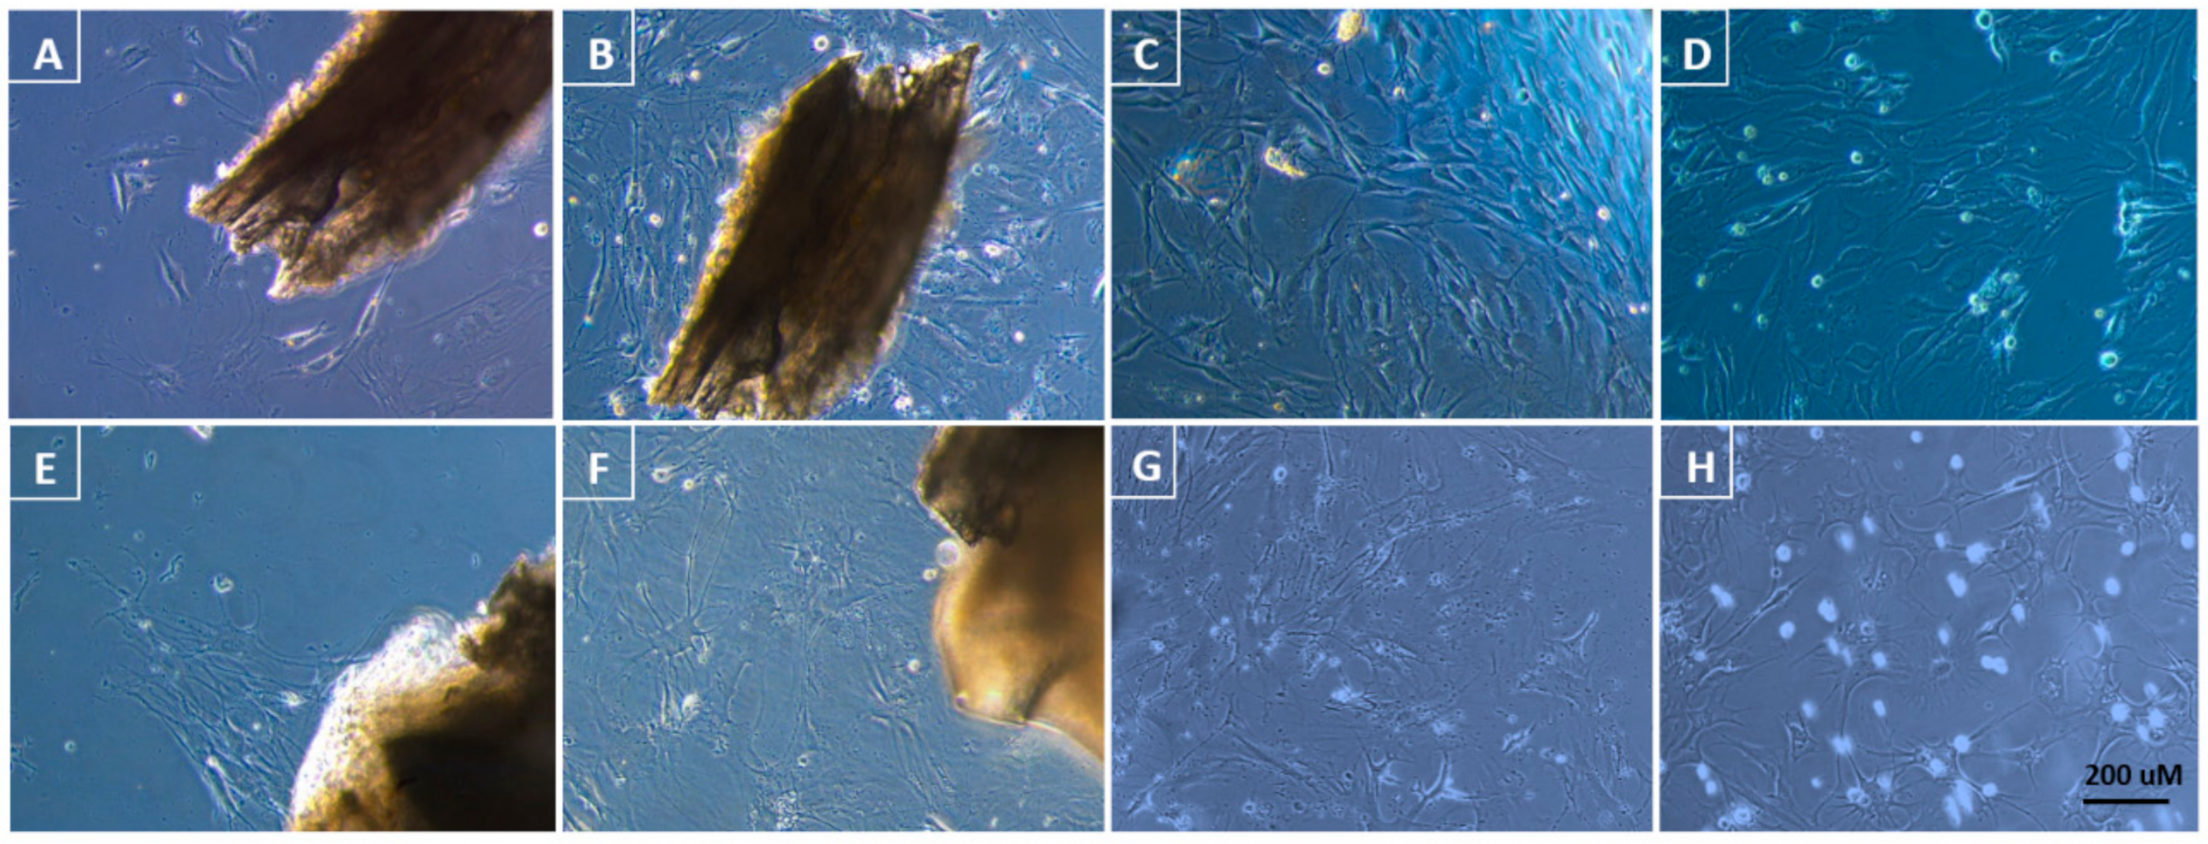 Animals | Free Full-Text | Establishing Cell Lines from Fresh or  Cryopreserved Tissue from the Great Crested Newt (Triturus cristatus): A  Preliminary Protocol